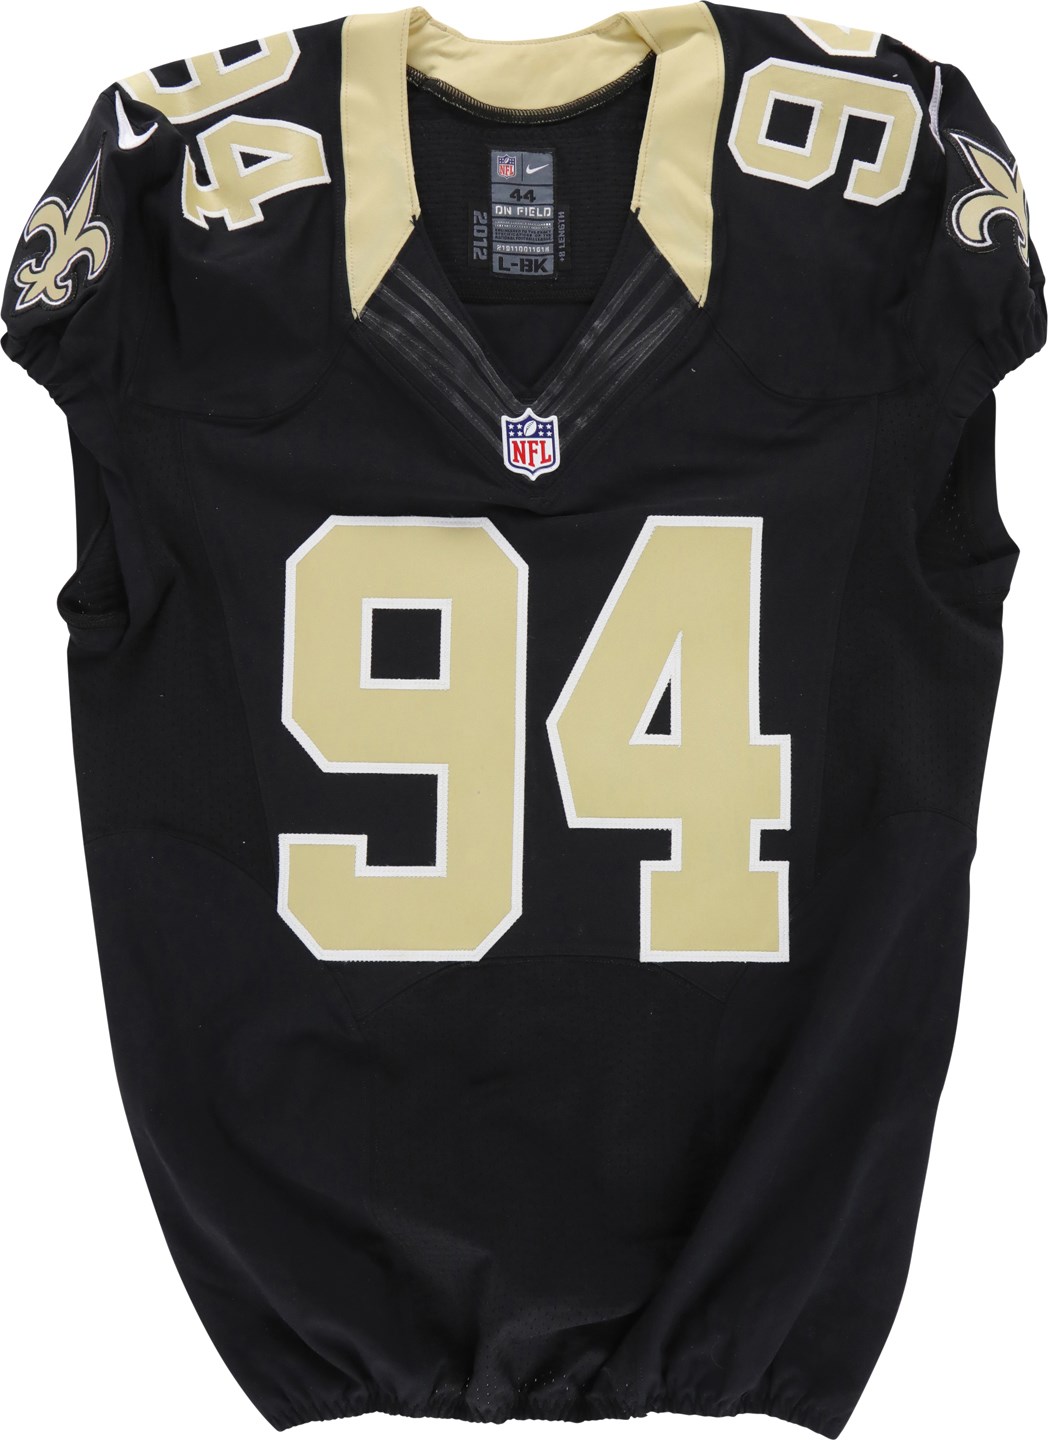 - 2012 Cam Jordan New Orleans Saints Game Jersey Signed & Inscribed to Adrian Peterson (PSA)